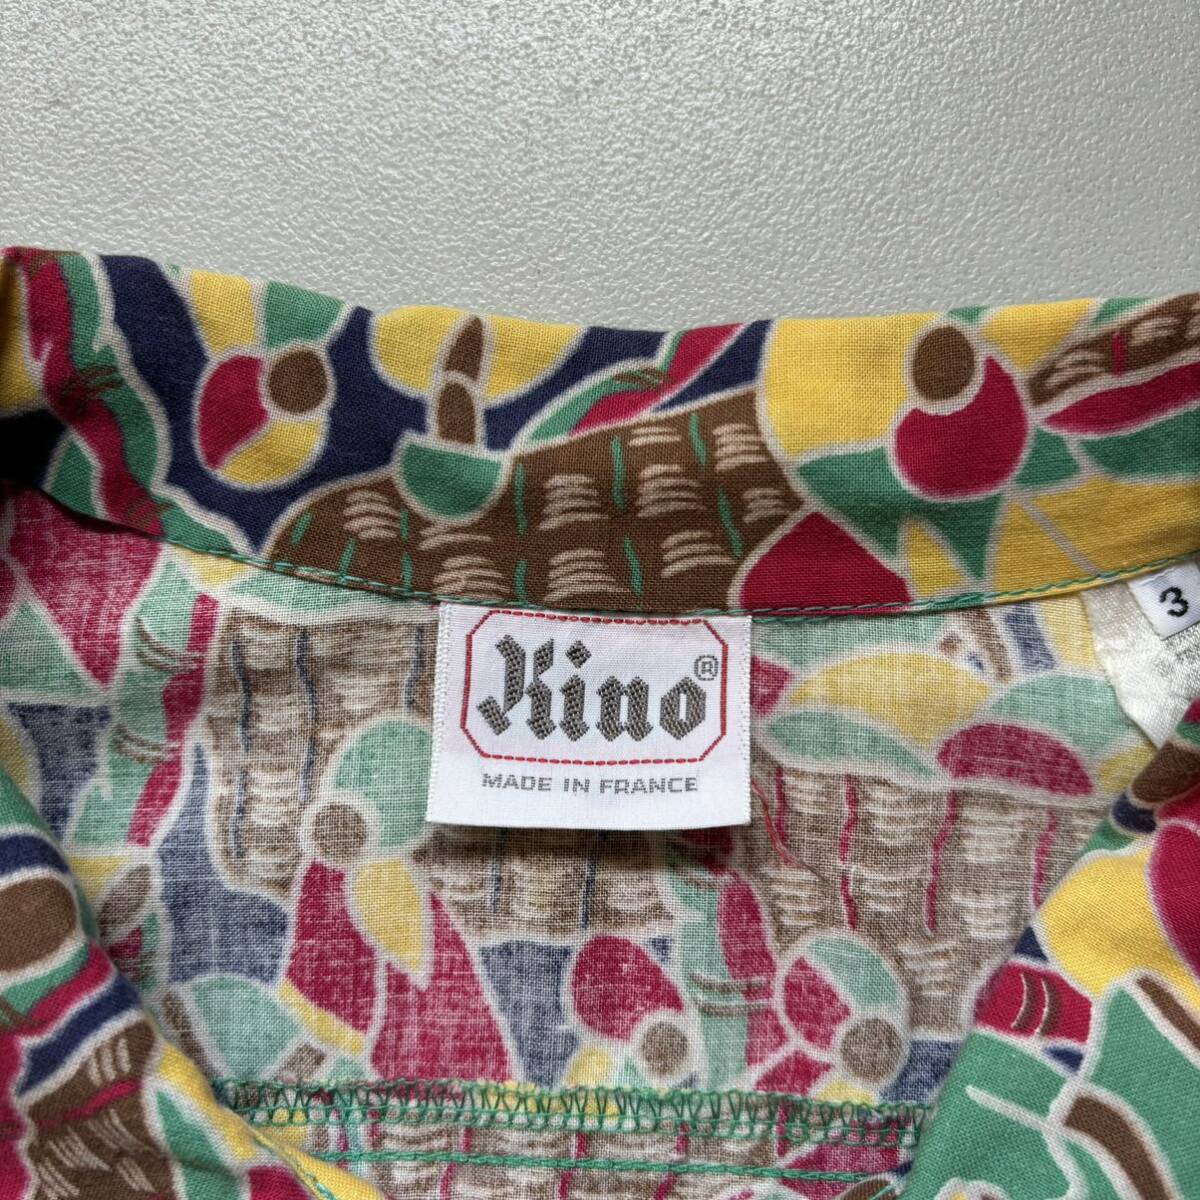 KINO All-over pattern S/S shirt “size L” “made in France” 総柄シャツ 半袖シャツ フランス製